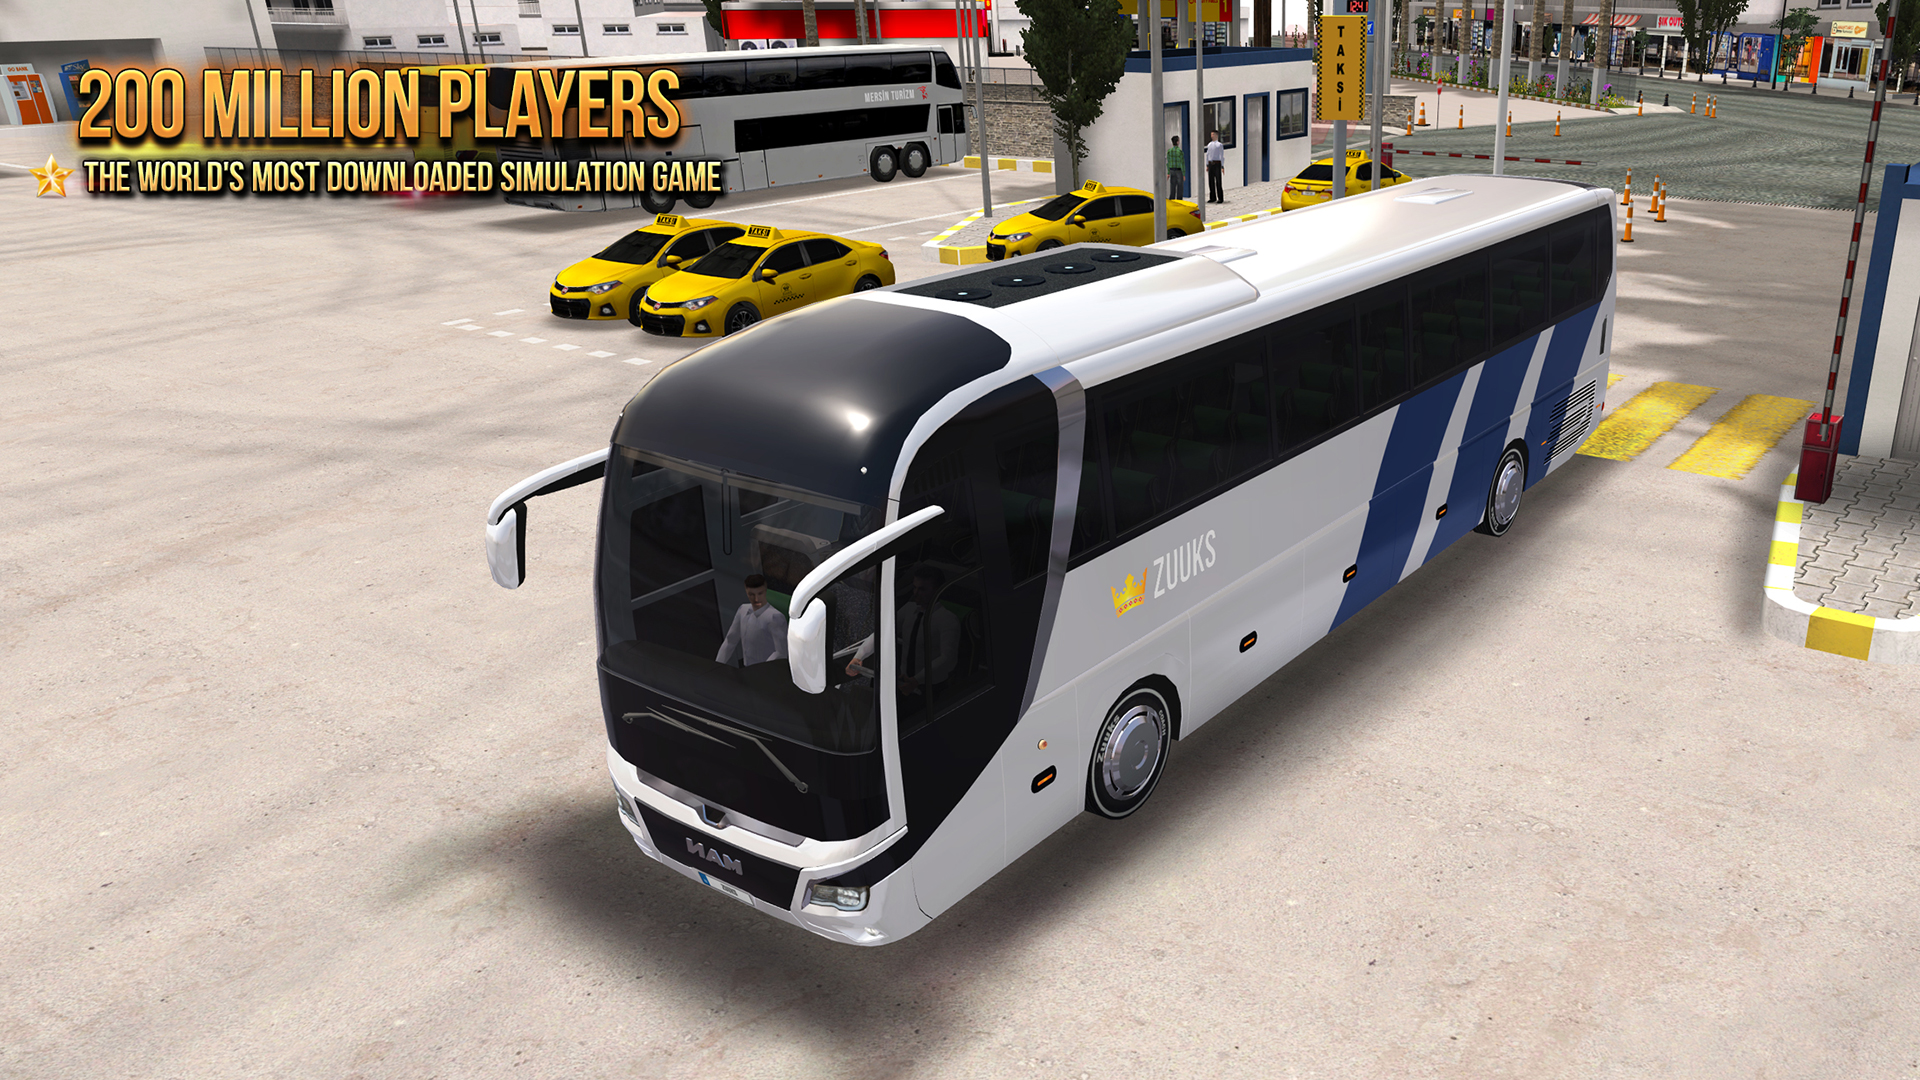 Proton Bus Simulator Road Lite - Best Android Gameplay 